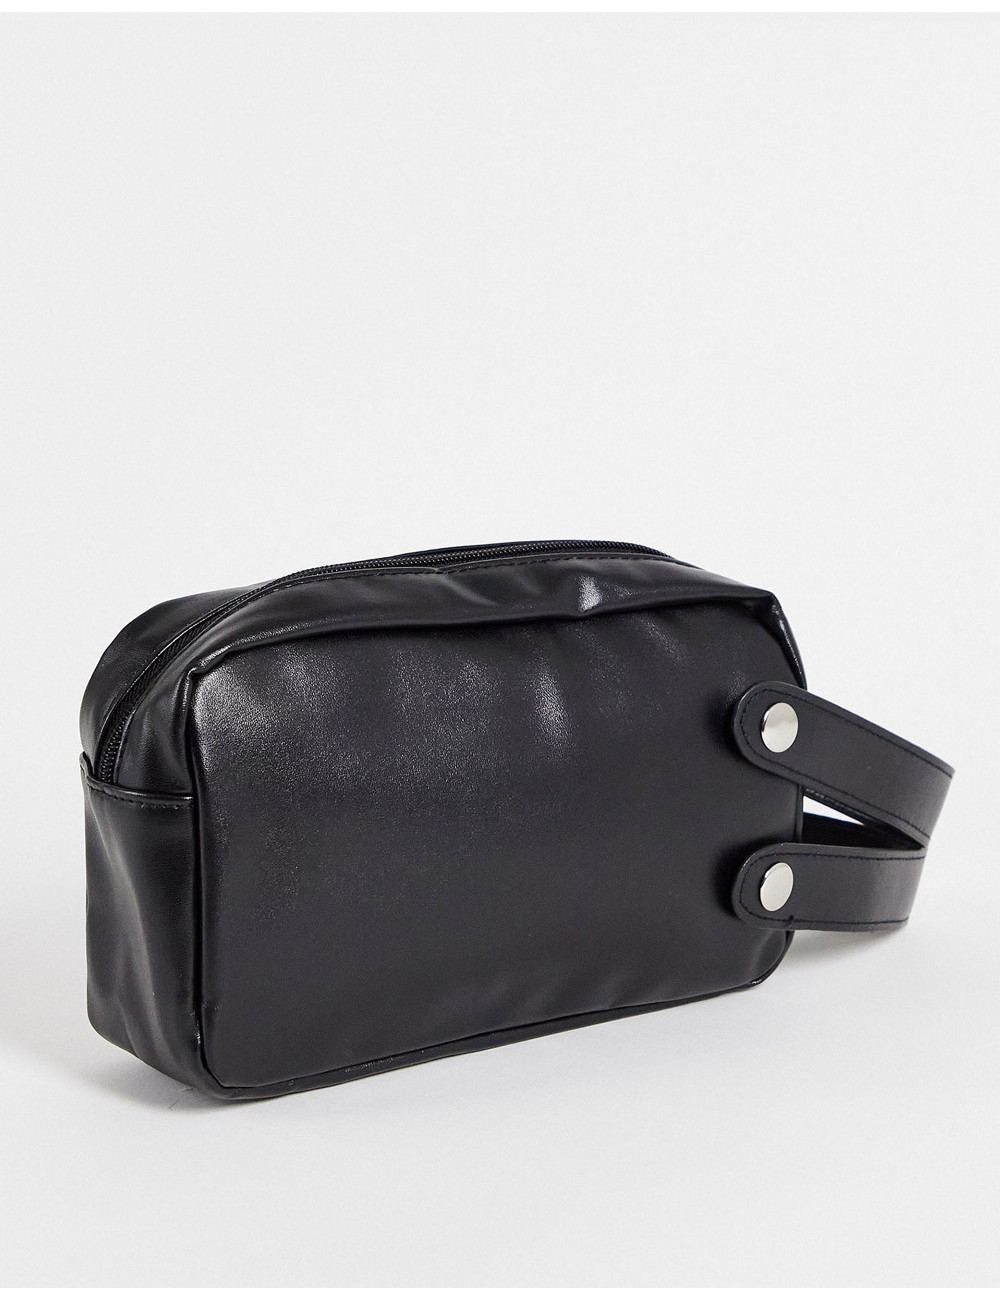 SVNX manly stuff toiletry bag